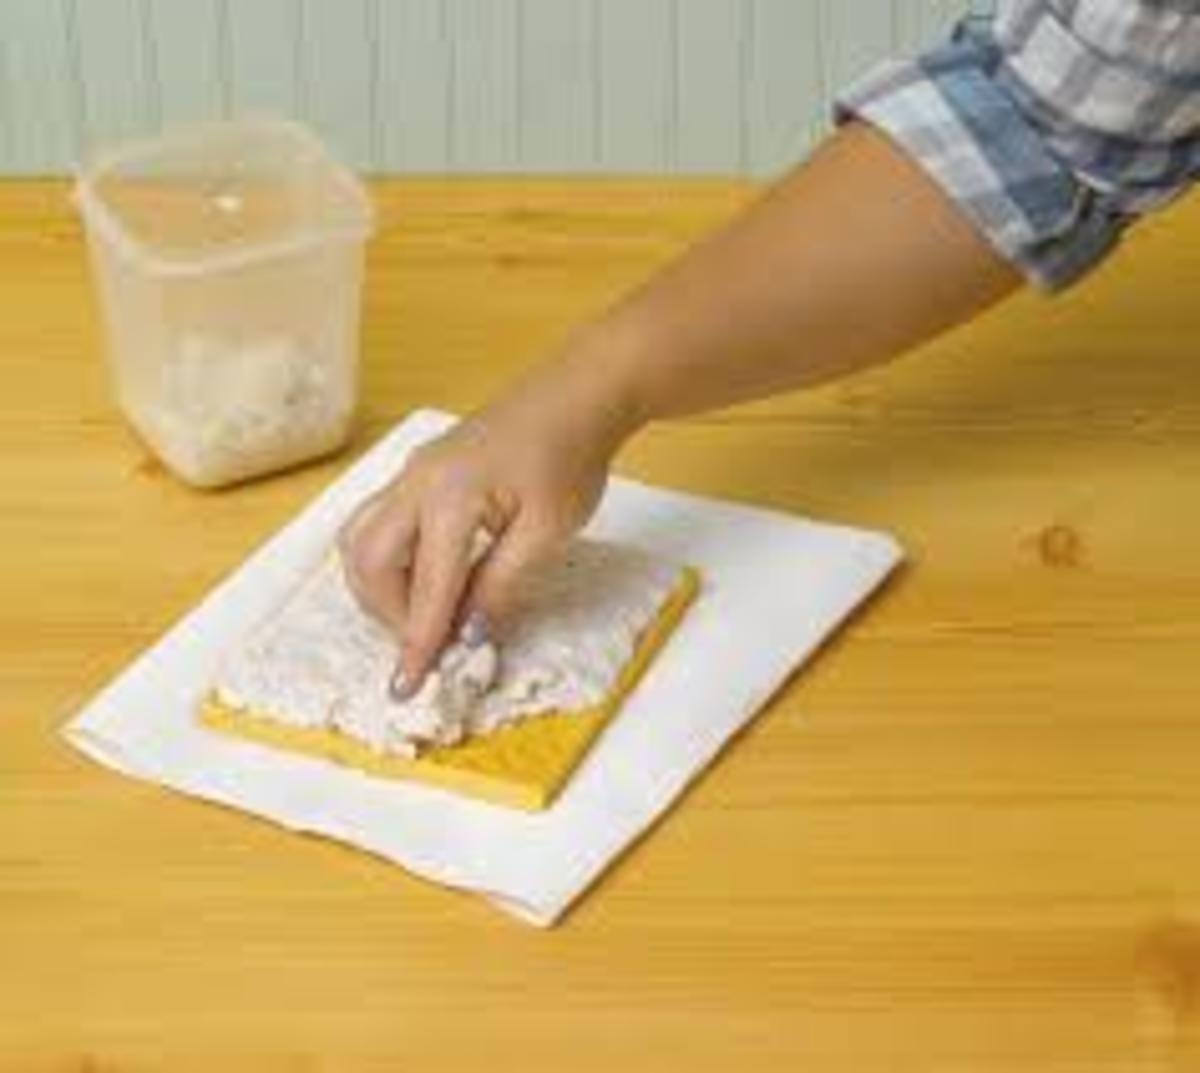 Press the pulp into the carved linoleum block.  Place a piece of screen on top of the pulp and use a sponge to remove the excess water.  Add more pulp and repeat the steps until the thickness is achieved.  Gentle remove from the mold.